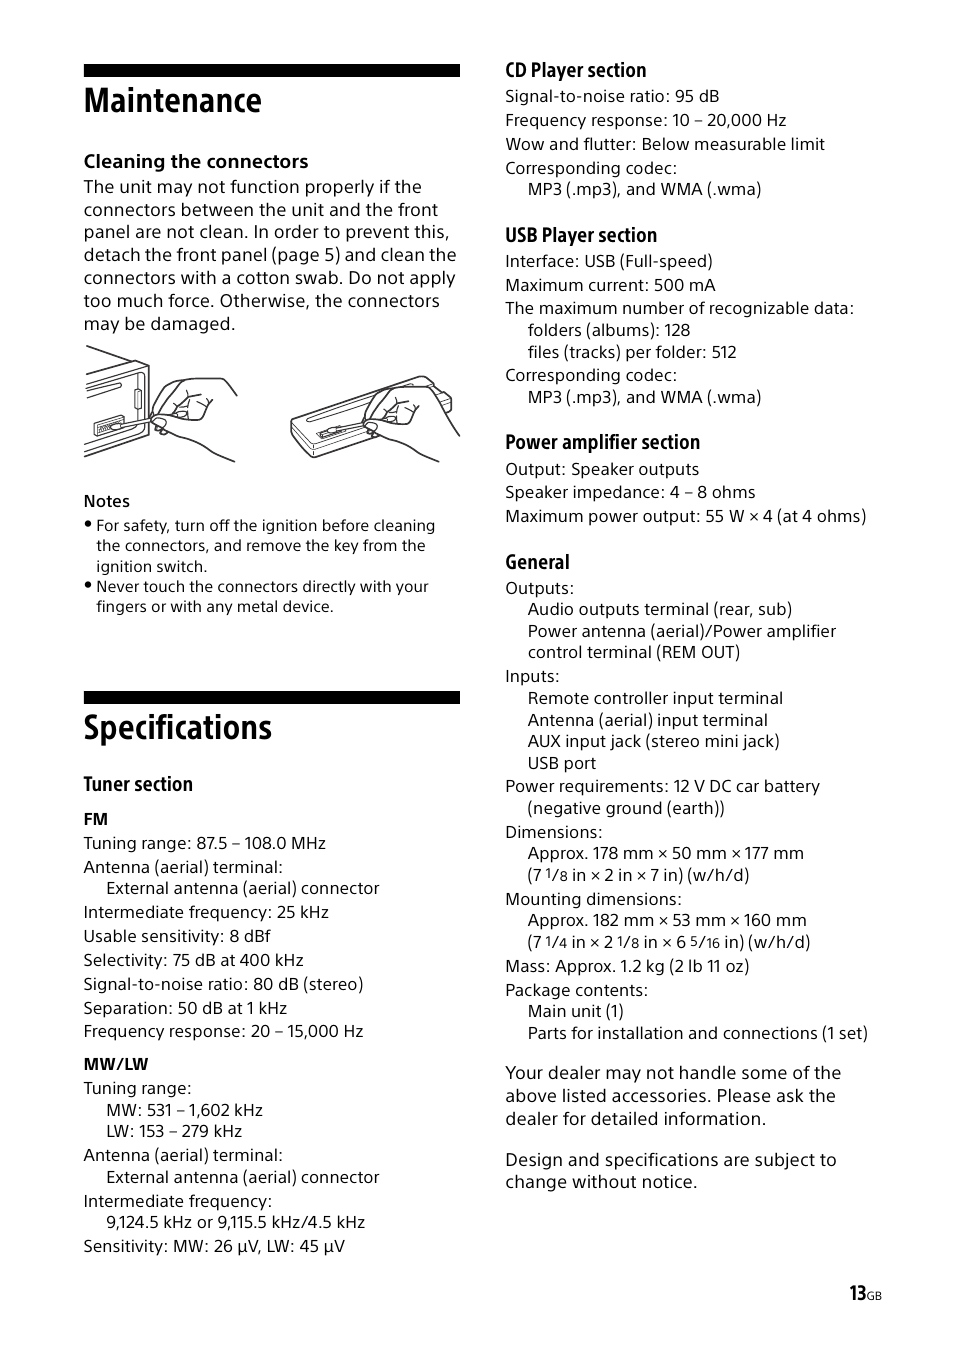 Maintenance, Specifications, Maintenance specifications | General | Sony CDX-G1000U User Manual | Page 13 / 84